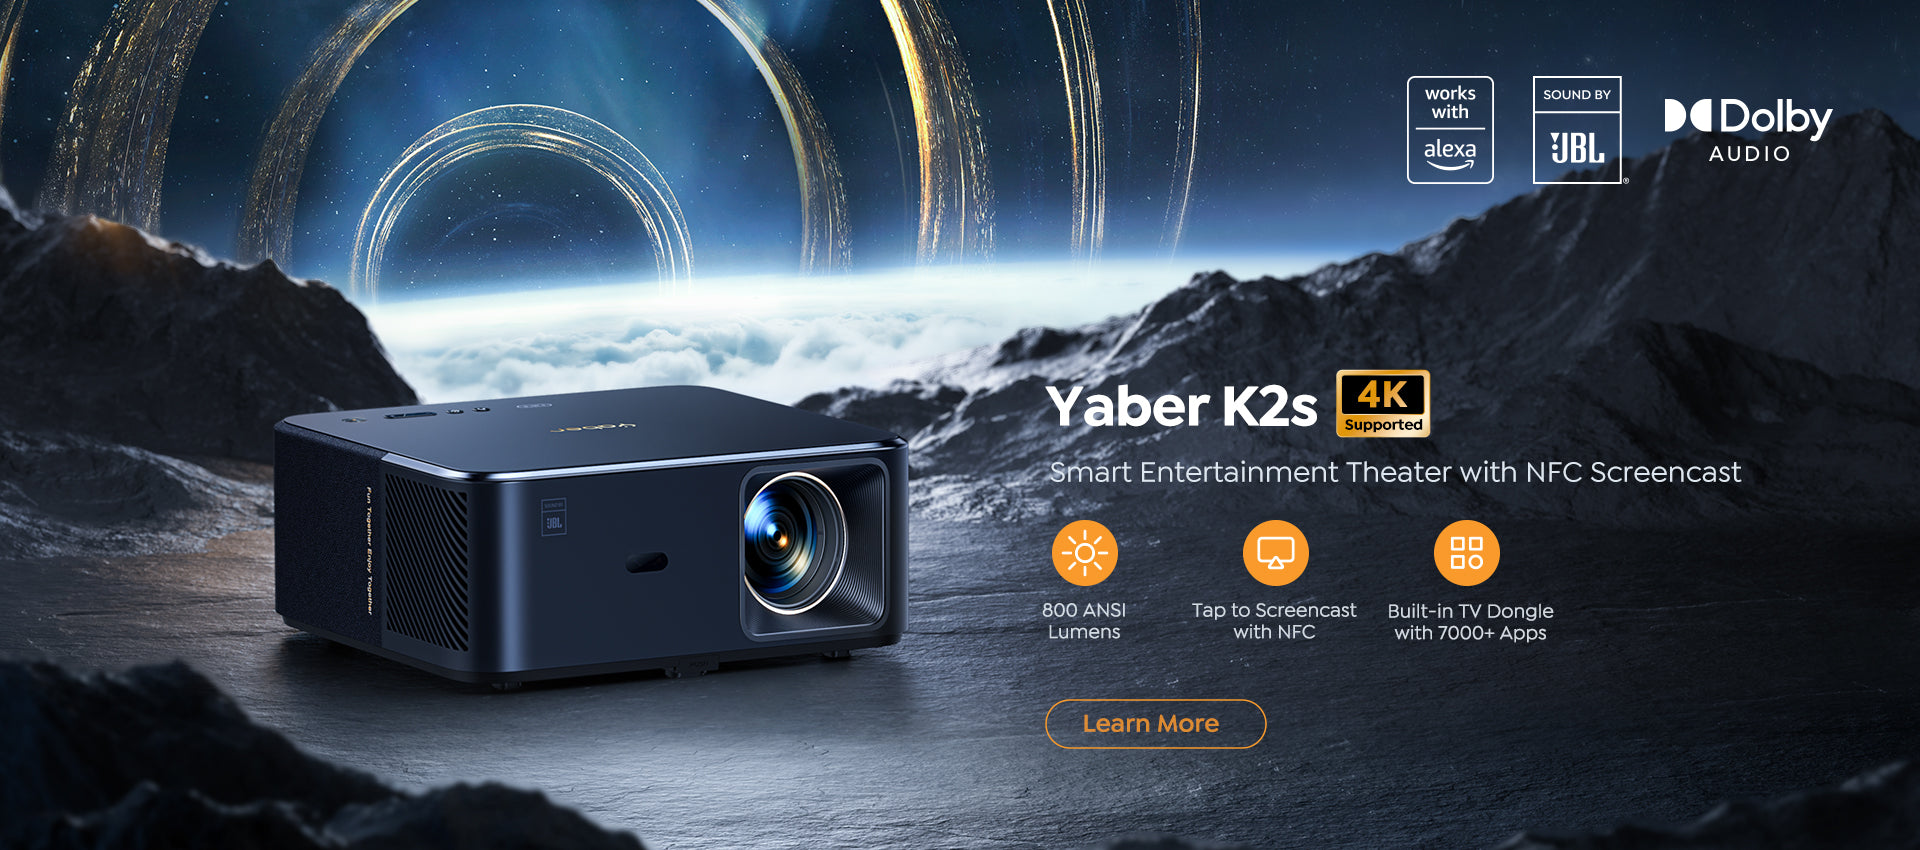 Yaber K2s vs Yaber Y21: What is the difference?